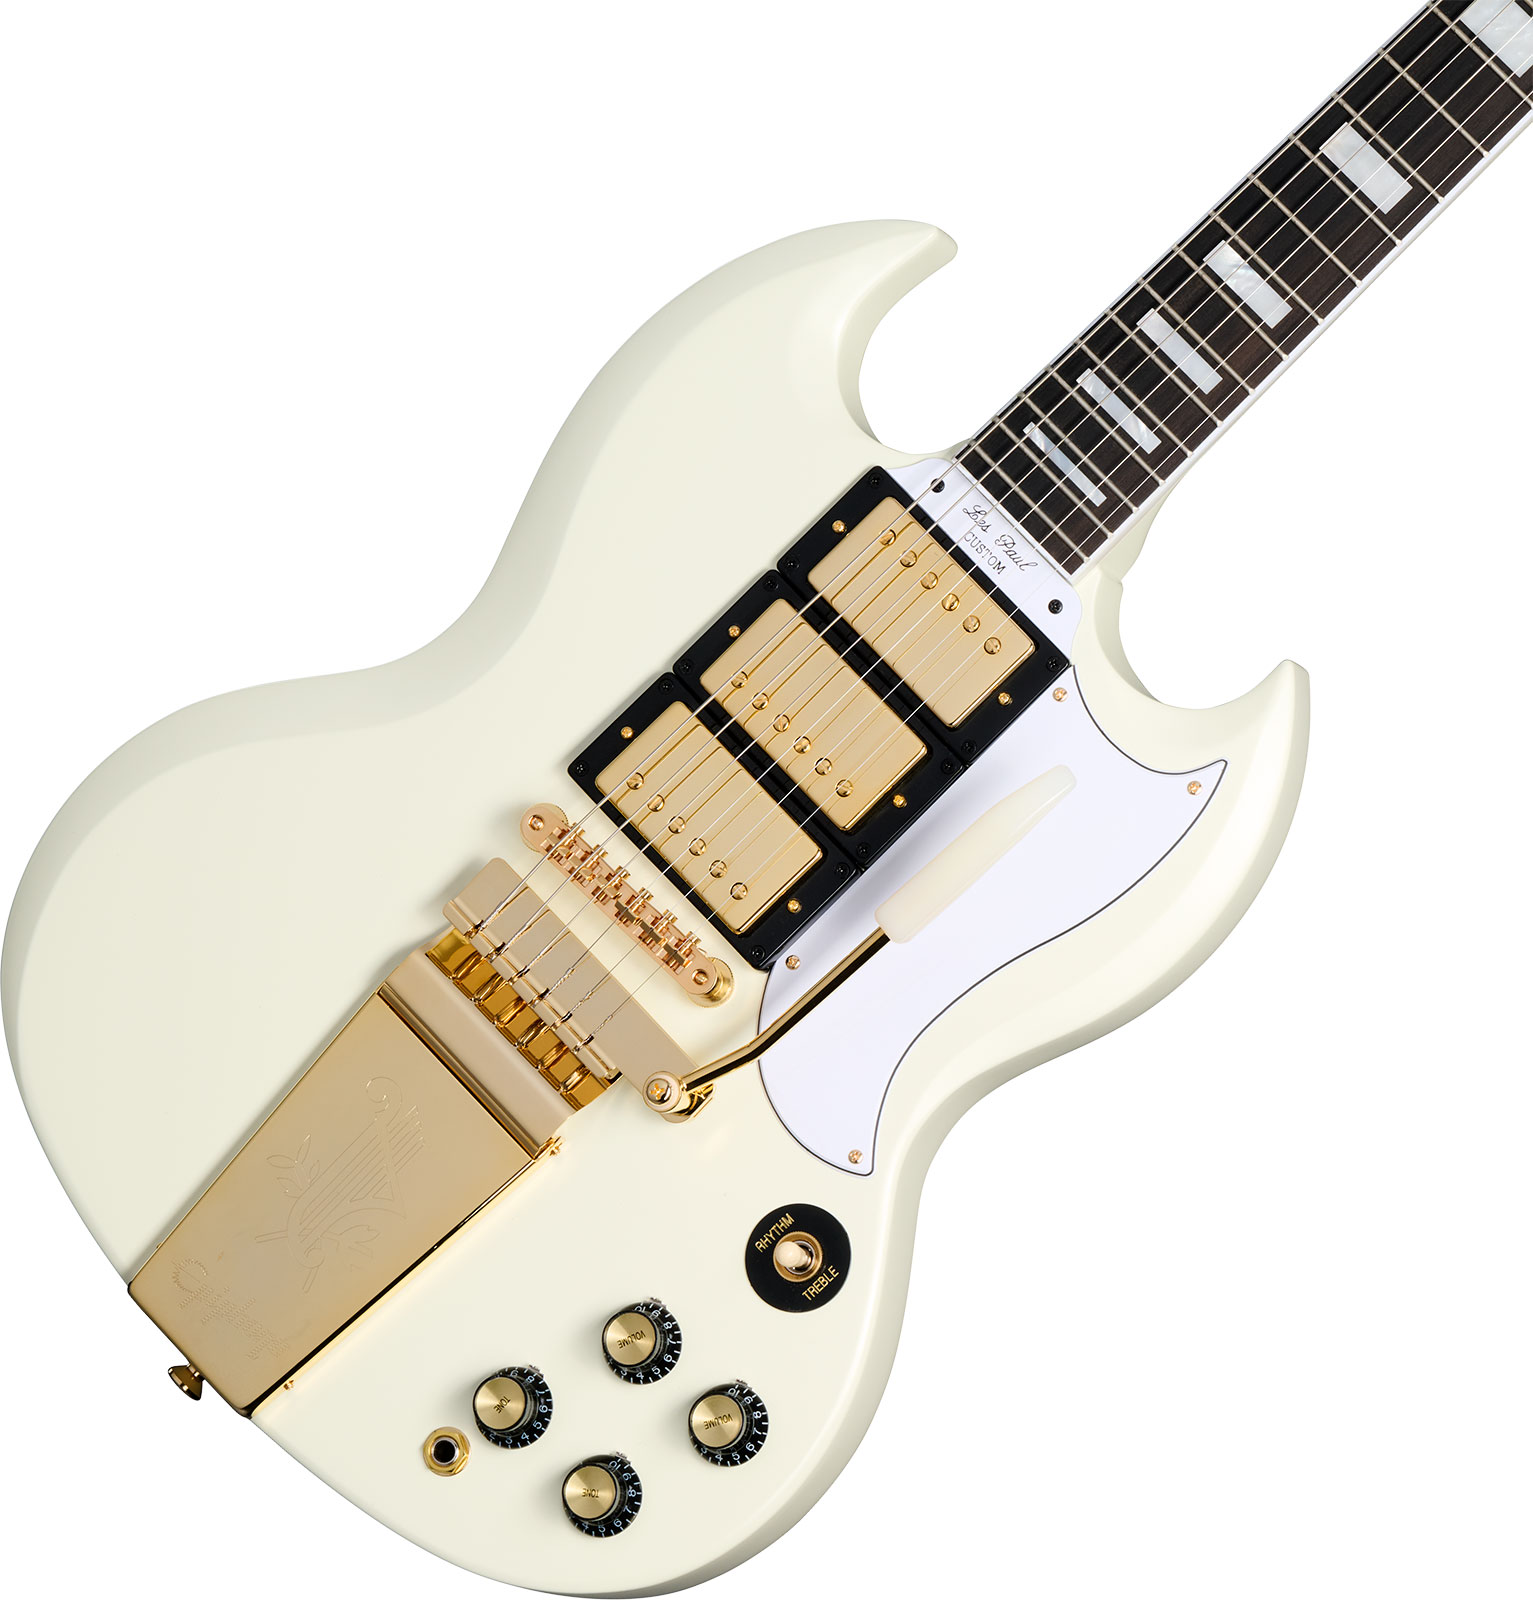 Epiphone Sg Les Paul Custom 1963 Maestro Vibrola Inspired By 2h Trem Eb - Vos Classic White - Double cut electric guitar - Variation 3